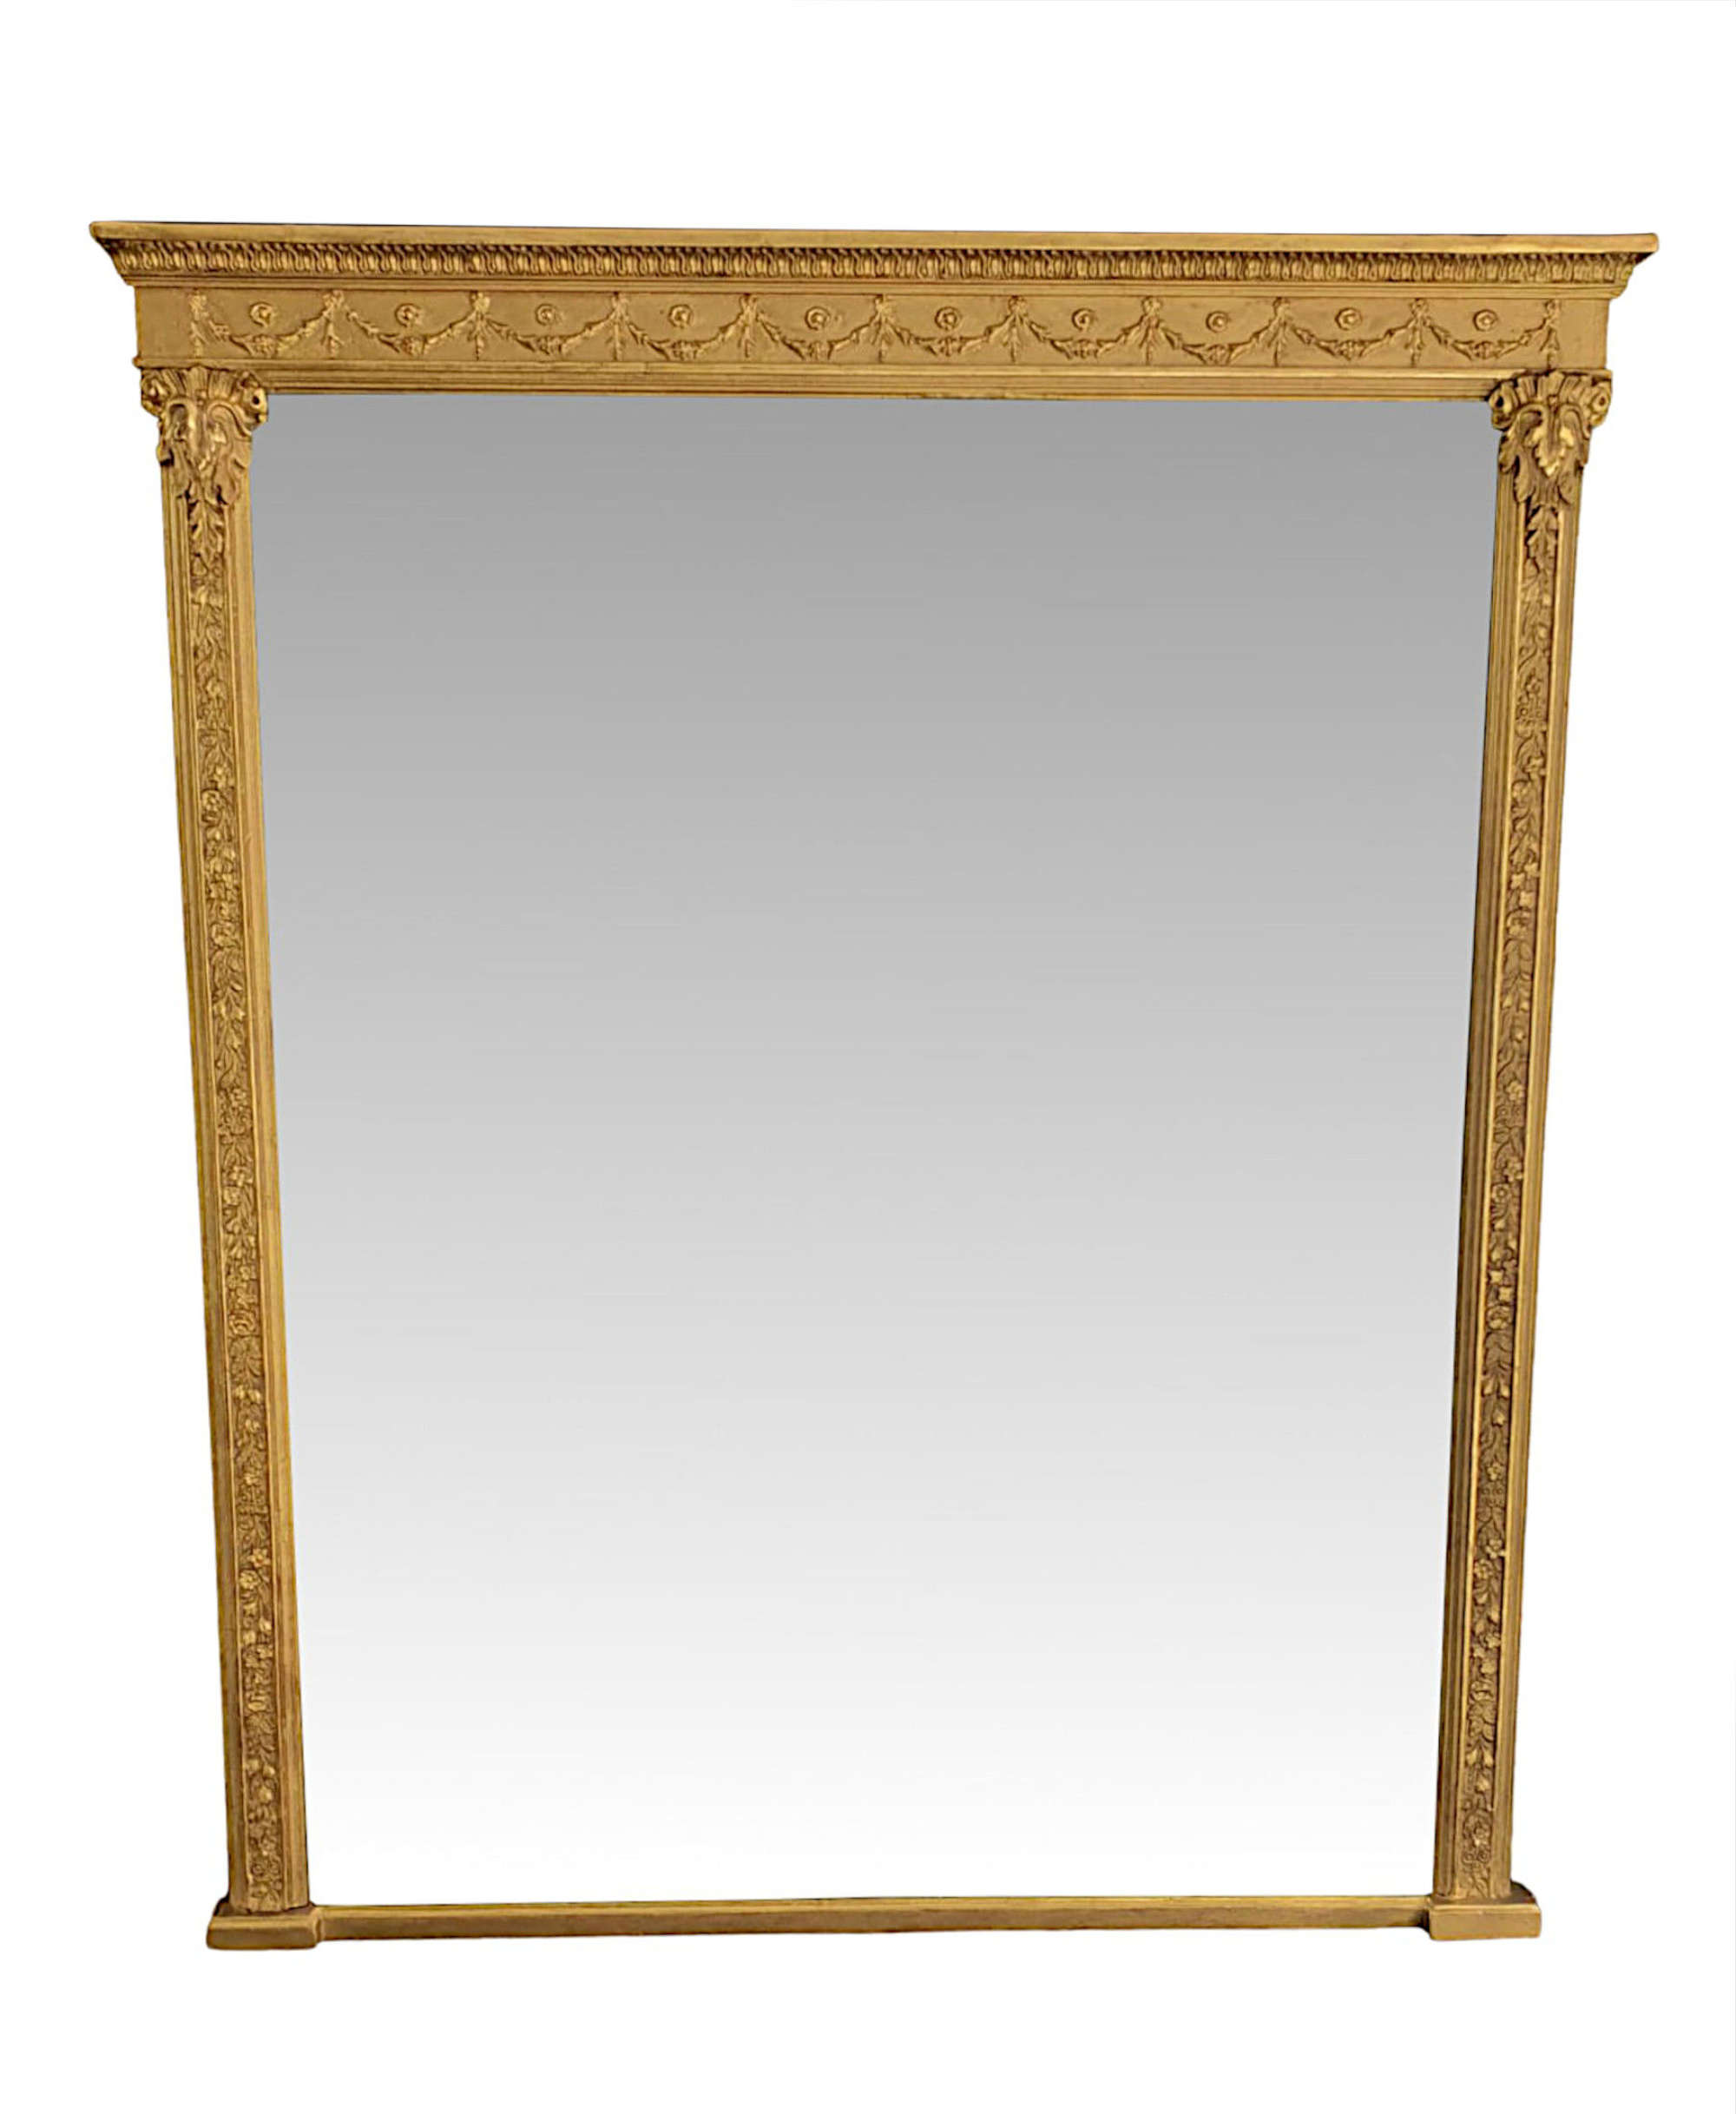 A Fabulous 19th Century Giltwood Antique Overmantle Mirror After Adams